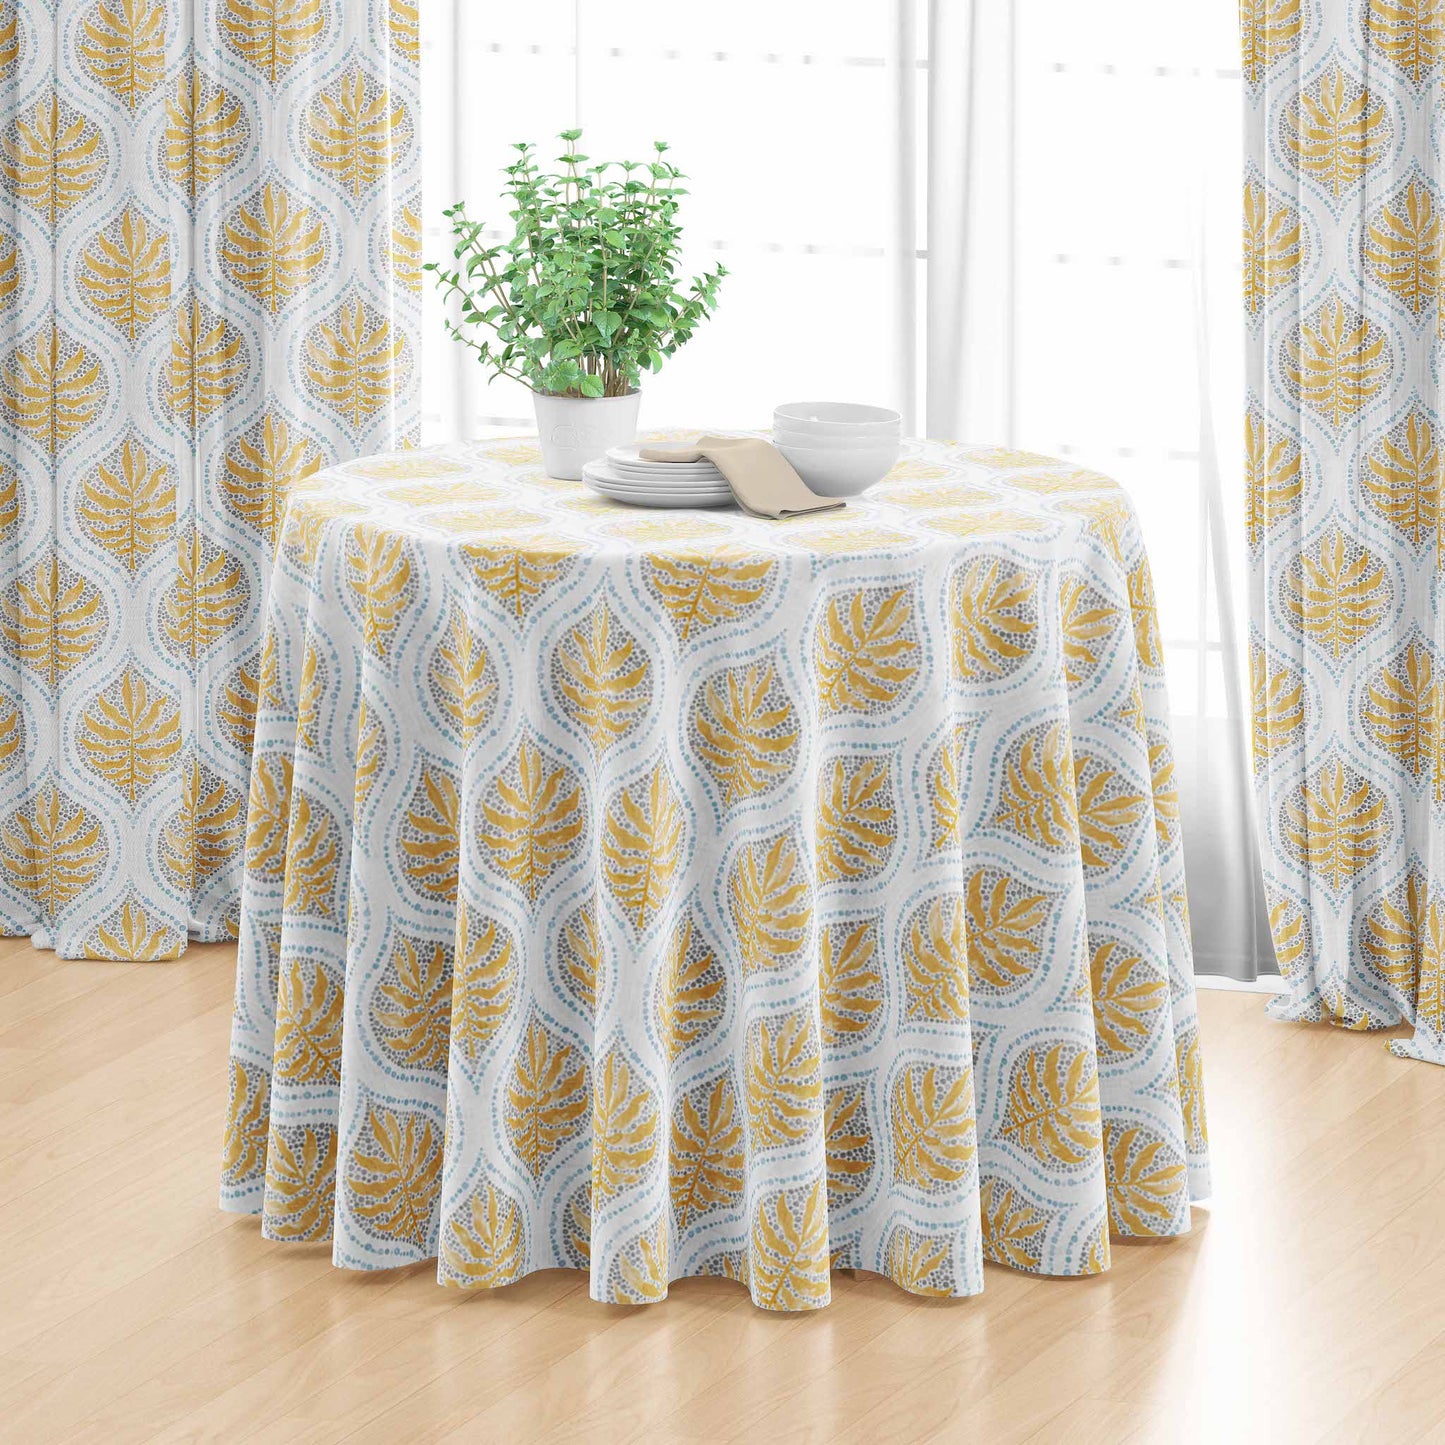 Round Tablecloth in Airlie Amber Ogee Floral Watercolor- Gold, Gray, Blue